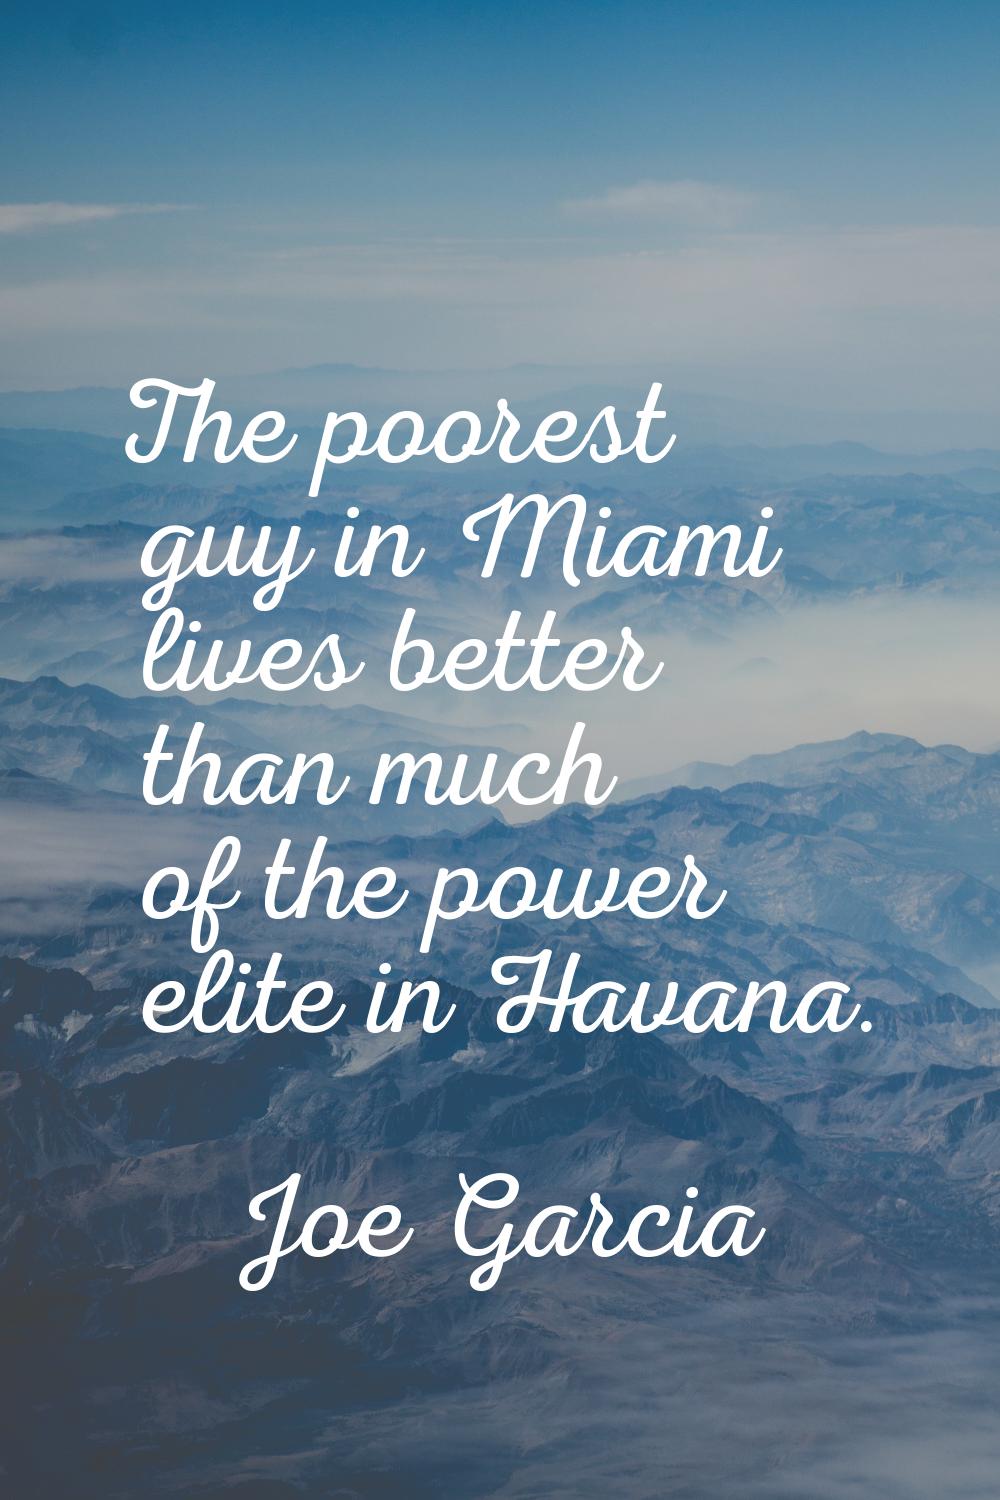 The poorest guy in Miami lives better than much of the power elite in Havana.